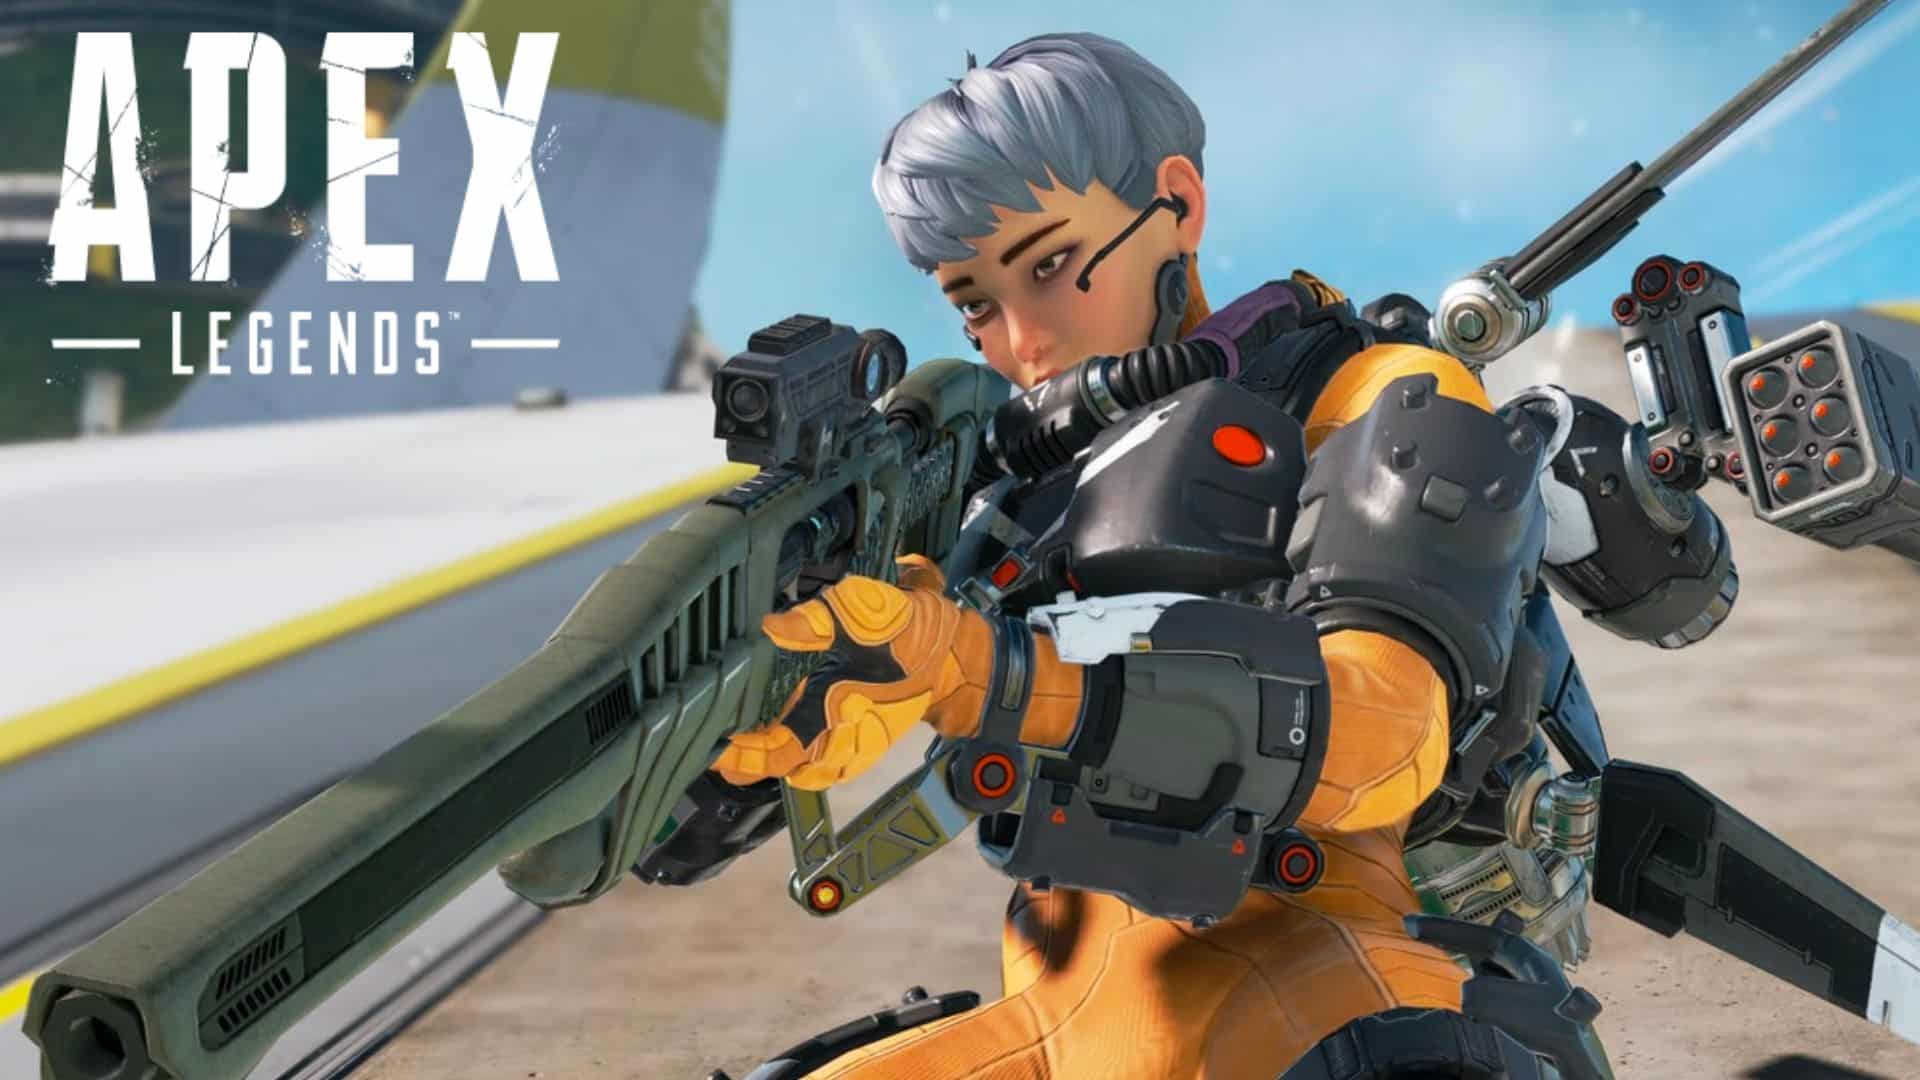 Valkyrie holding a sniper in Apex Legends